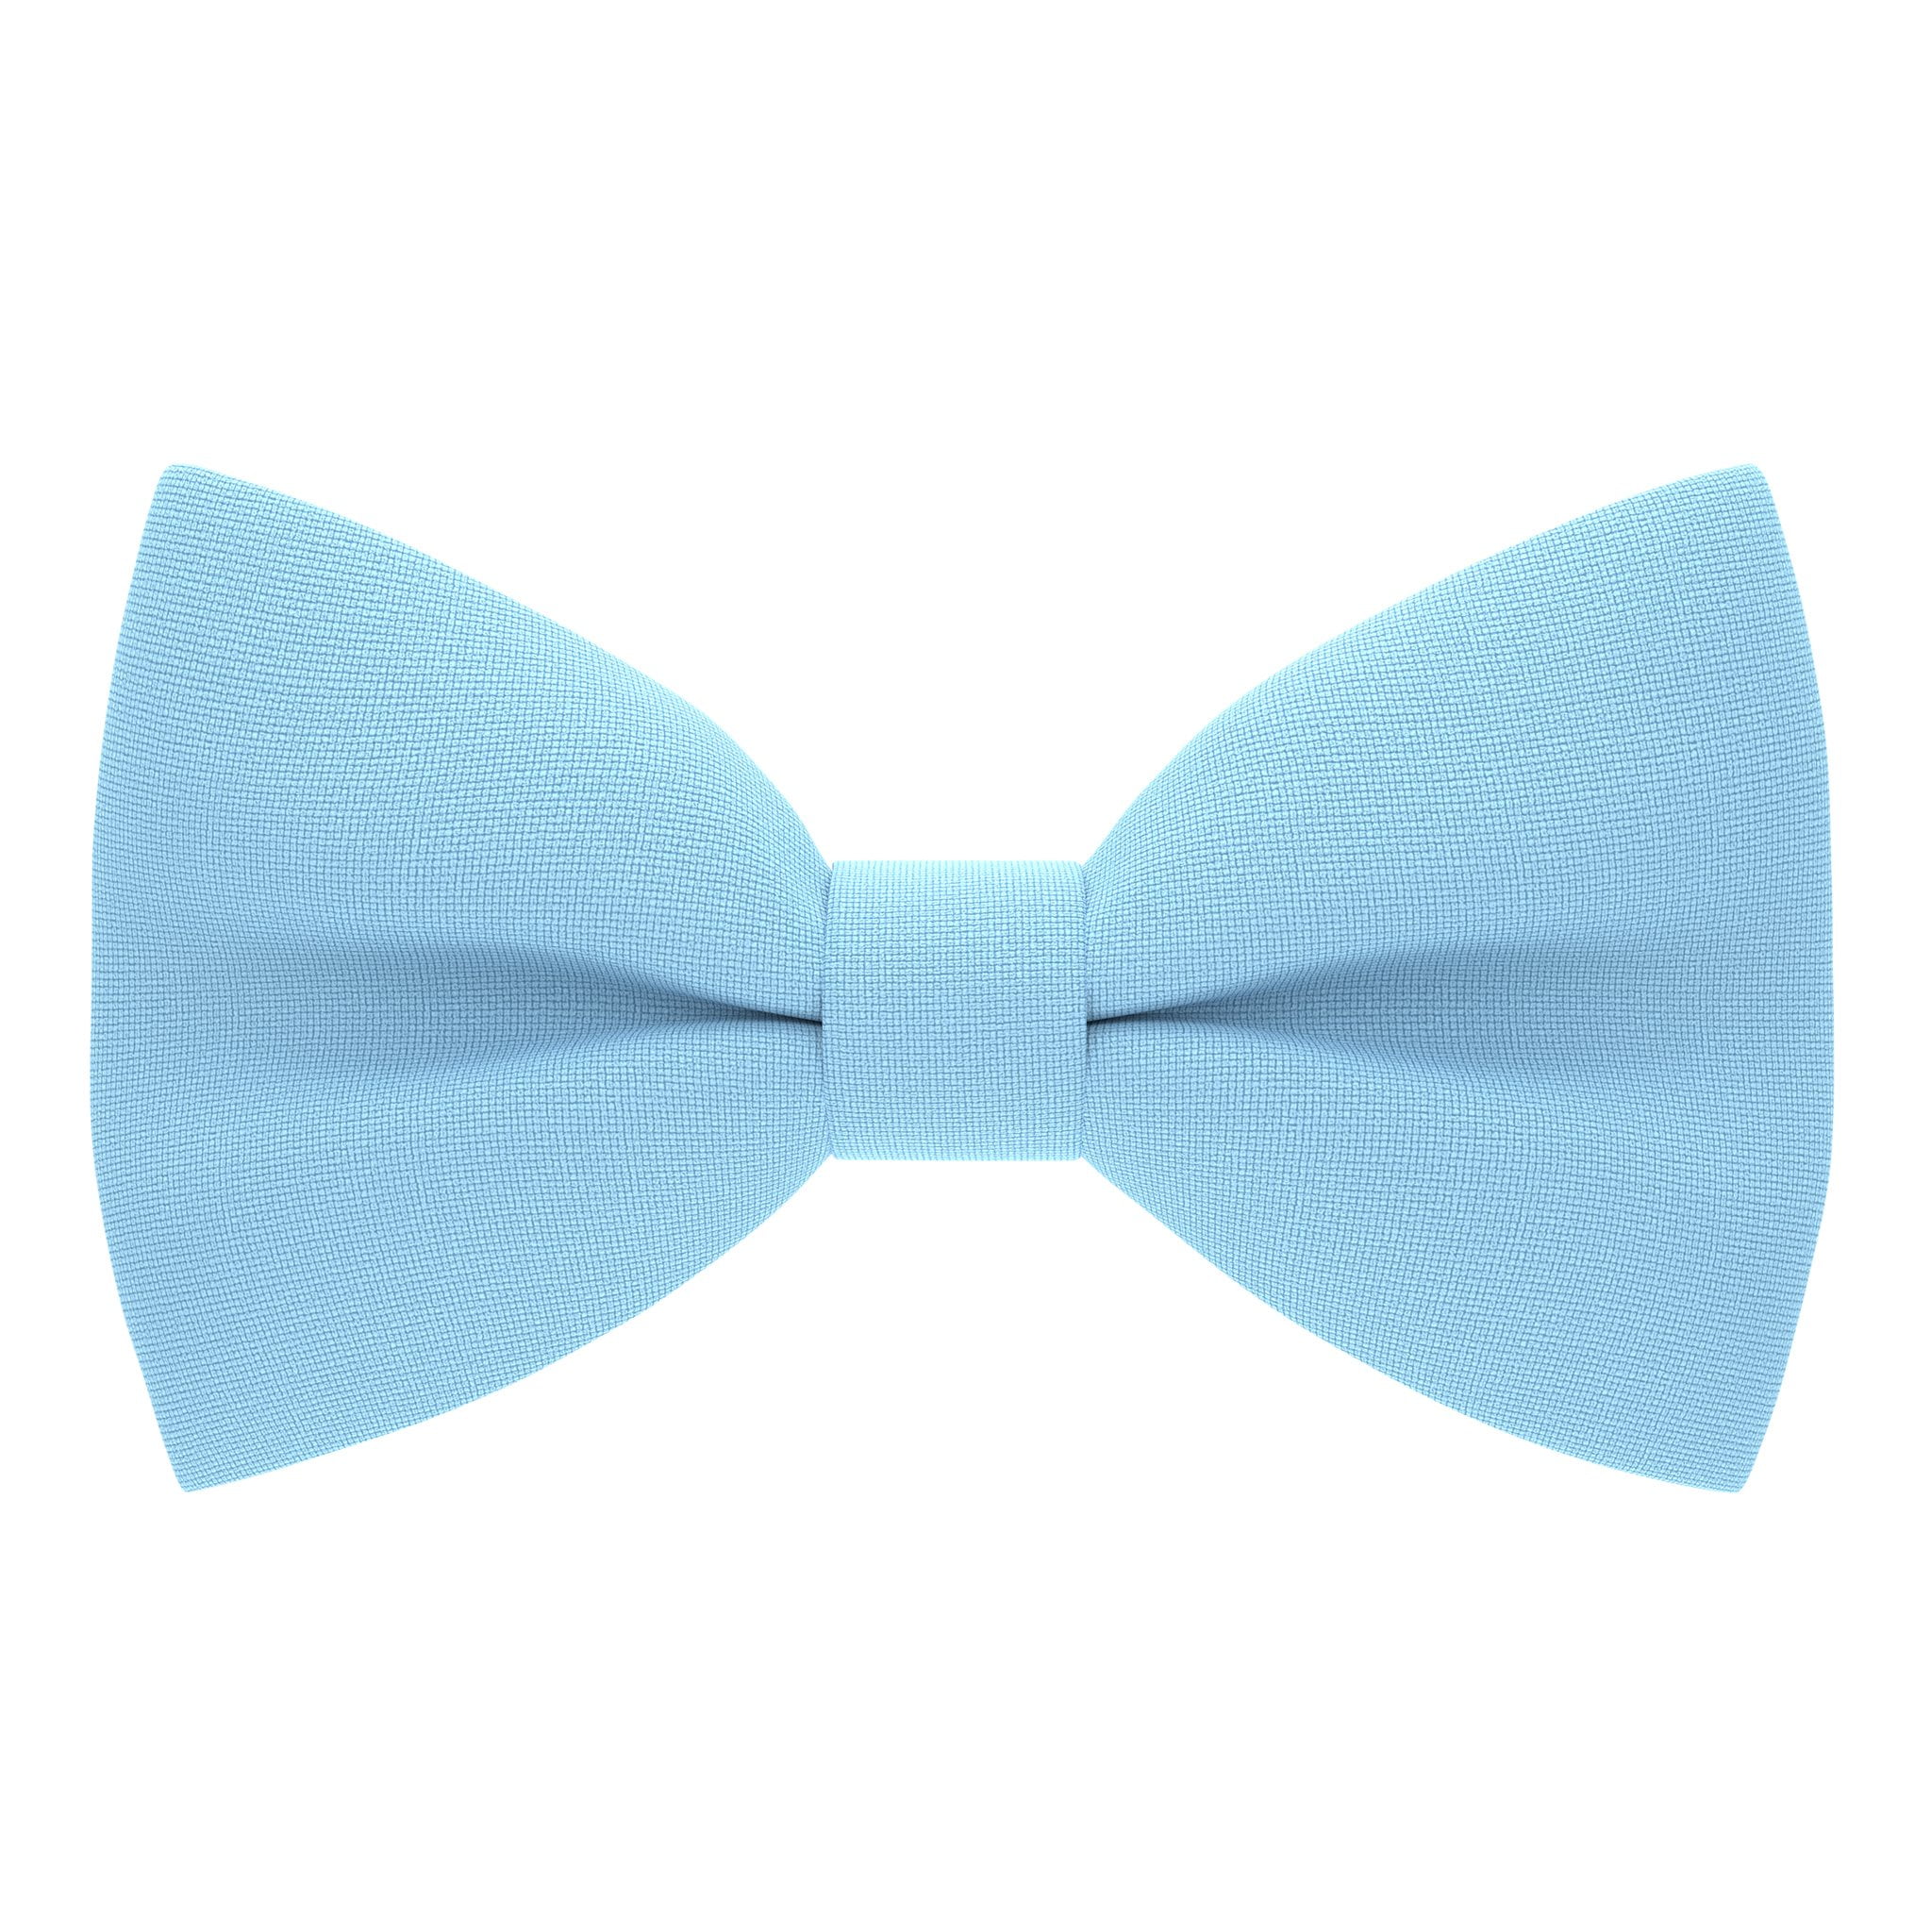 KIDS Bow Tie SUPER CUTE BLUE Adjustable BowTie Fashion For Toddlers New NeckTie